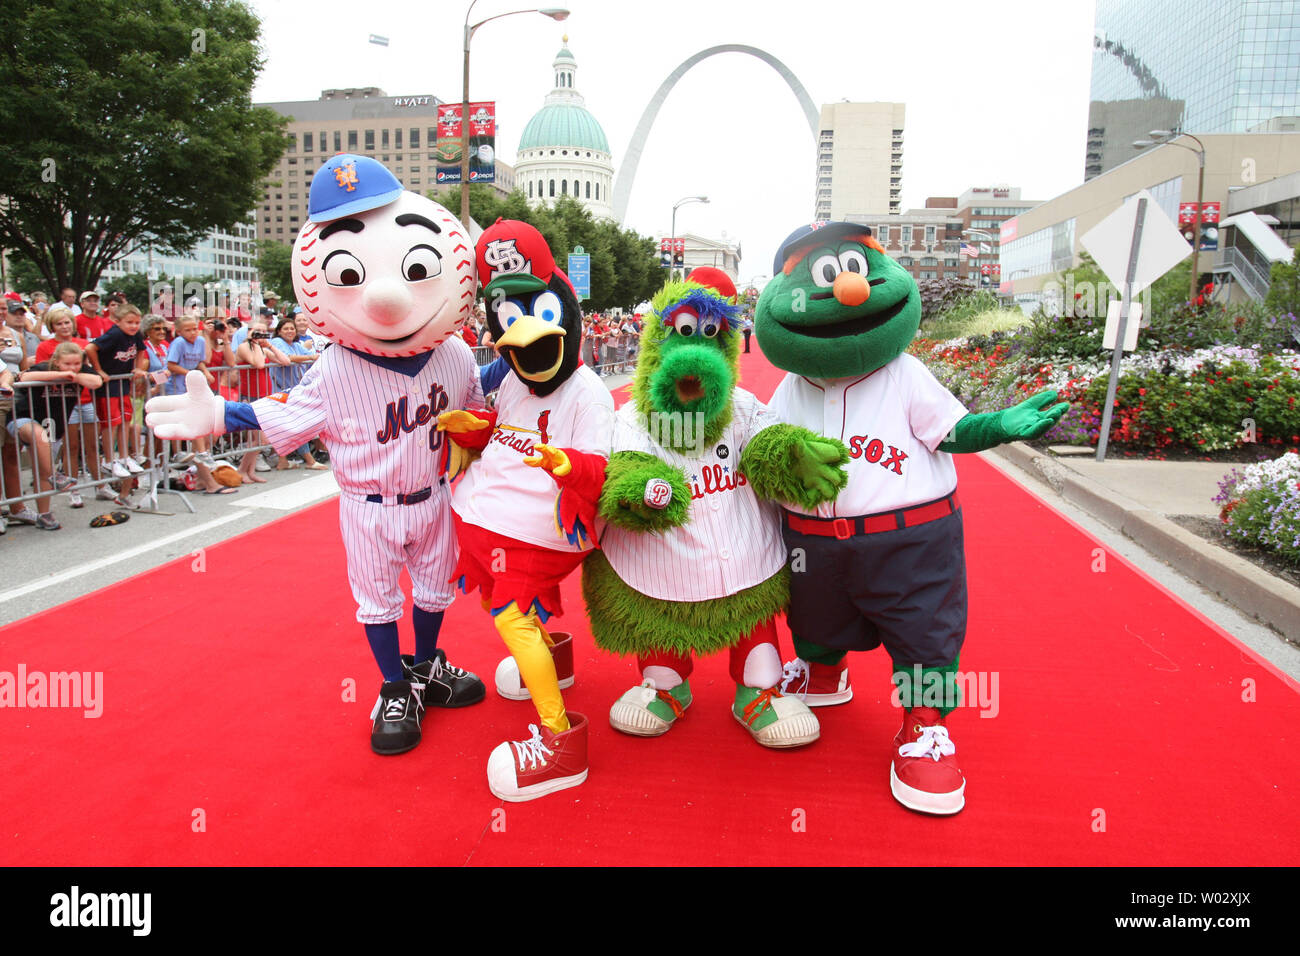 Baseball mascots from New York, St. Louis, Philadelphia and Boston ham it up just before the Red Carpet parade of players through downtown St. Louis during the MLB All Star Game festivities on July 14, 2009. UPI/Bill Greenblatt Stock Photo